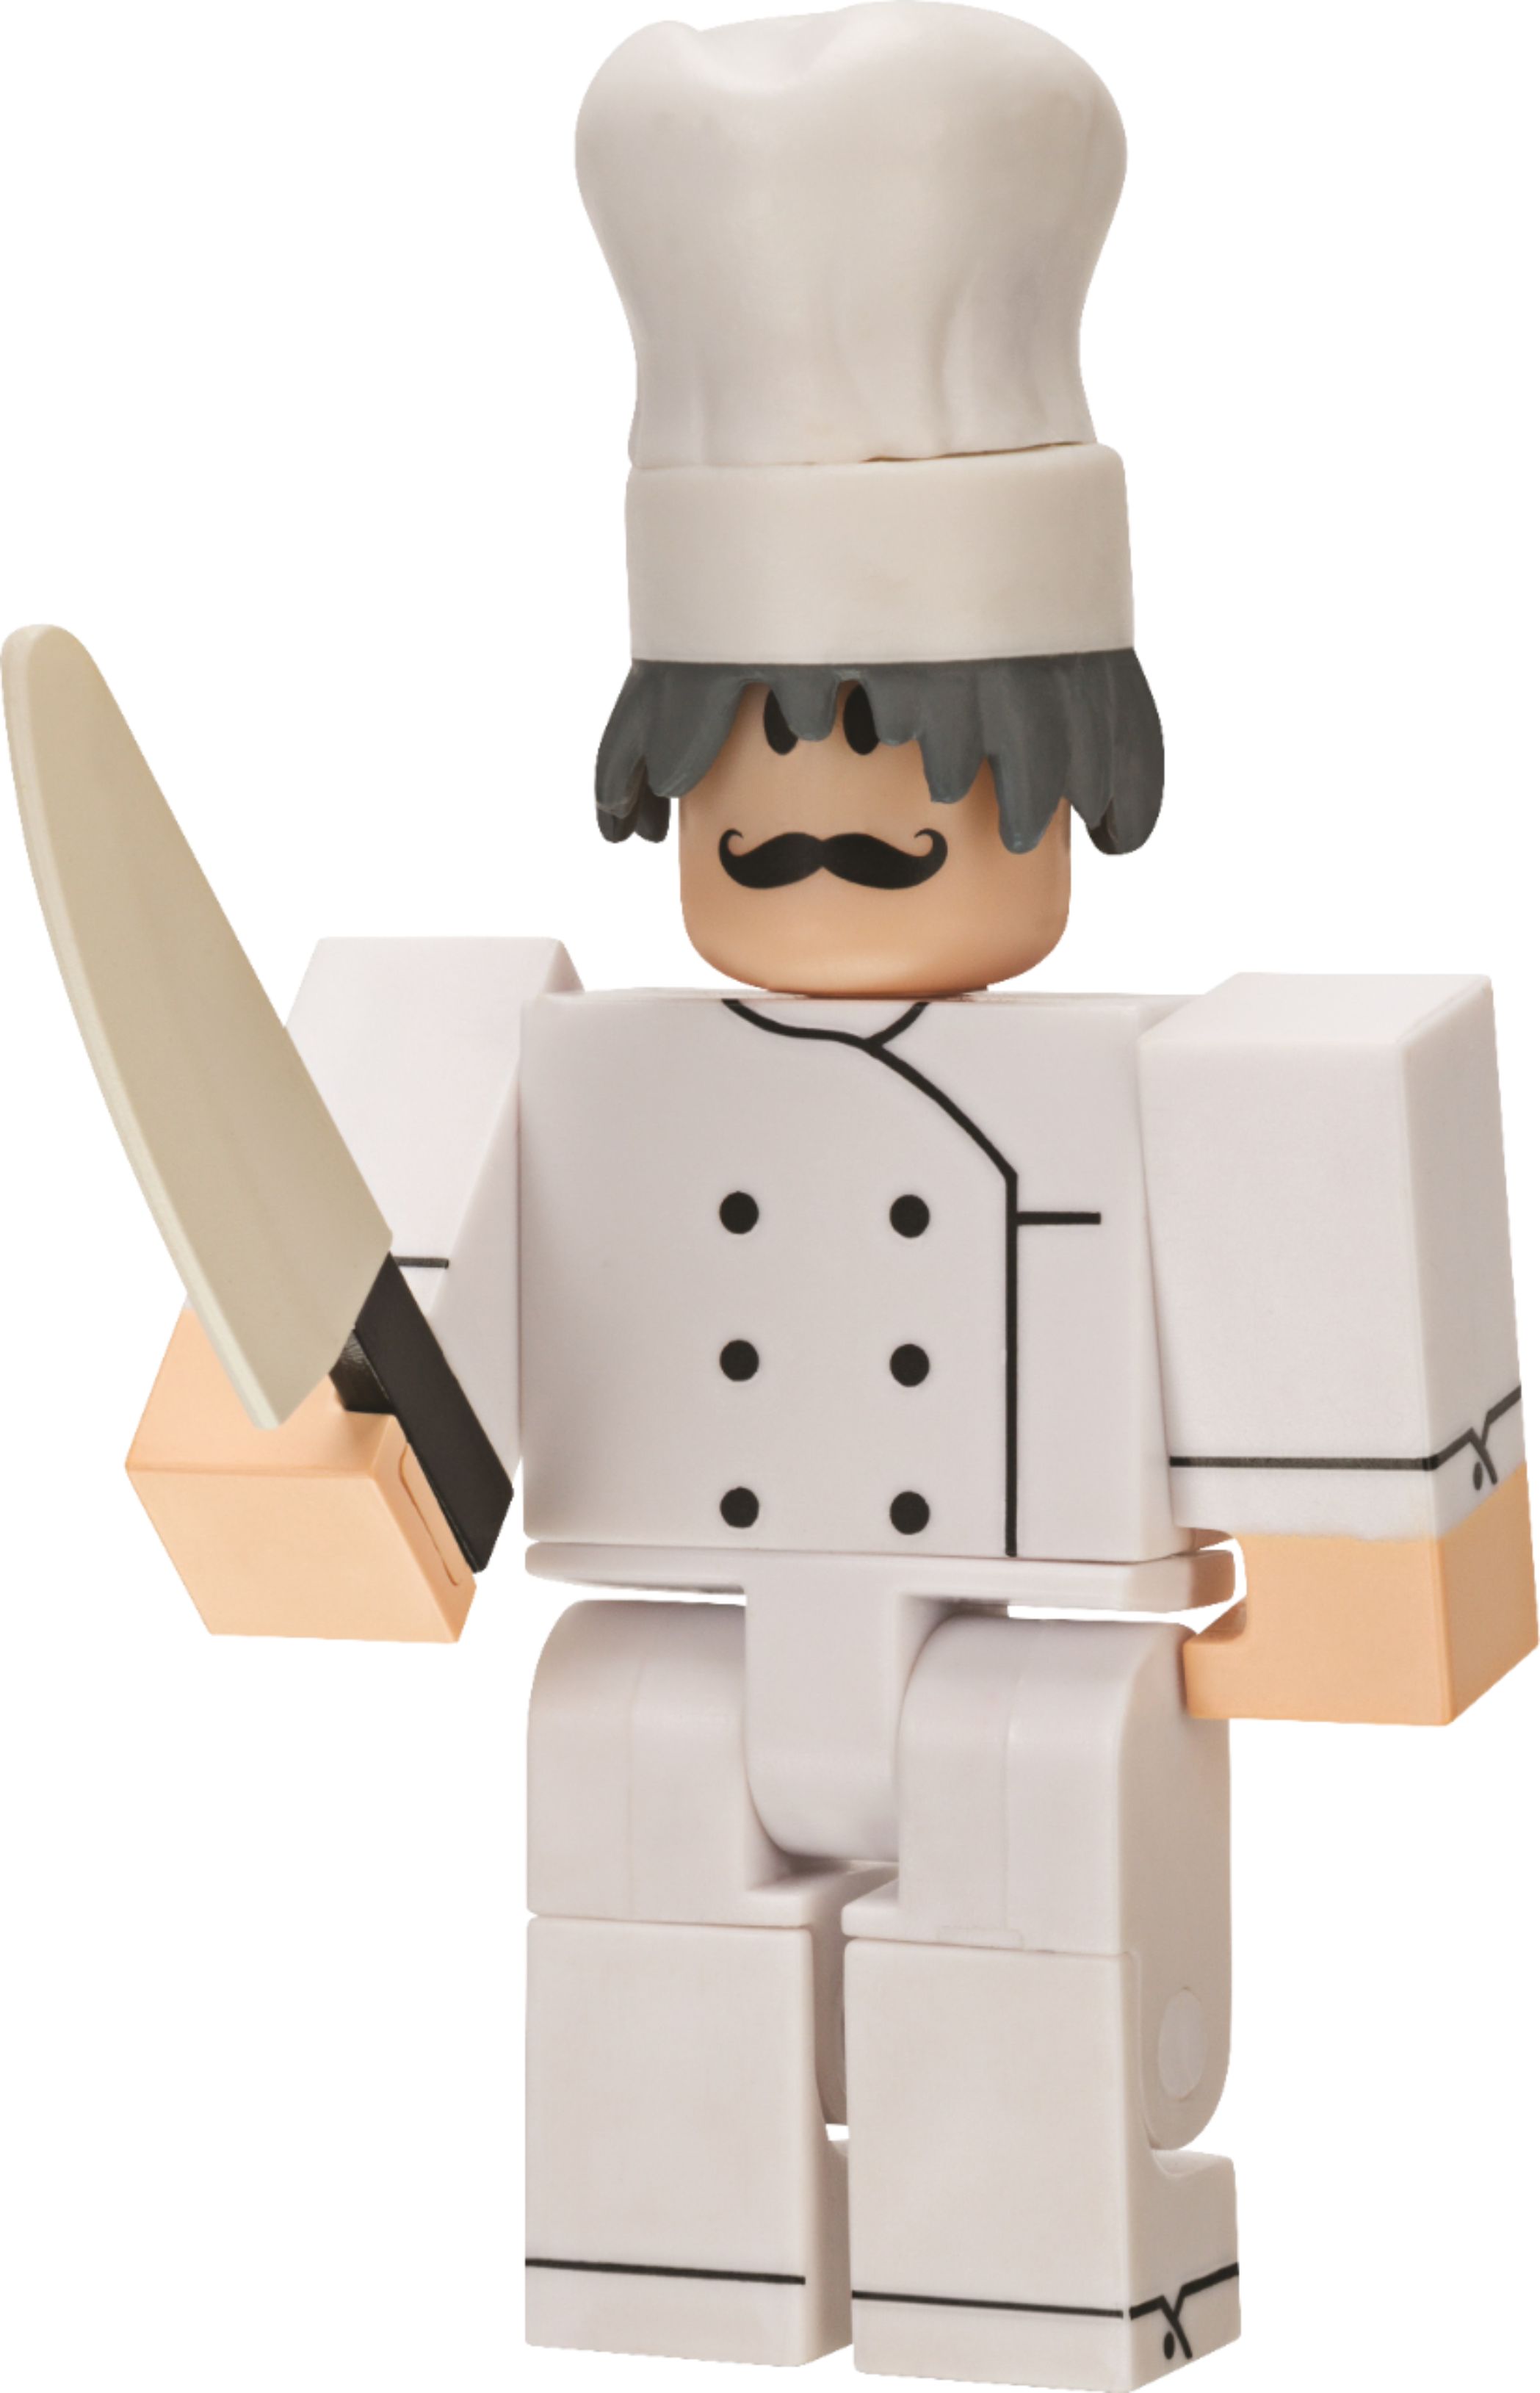 Roblox Series 6 Mystery Figure Styles May Vary Rob0173 Best Buy - jazwares roblox imagination articulated figure styles may vary rob0268 best buy